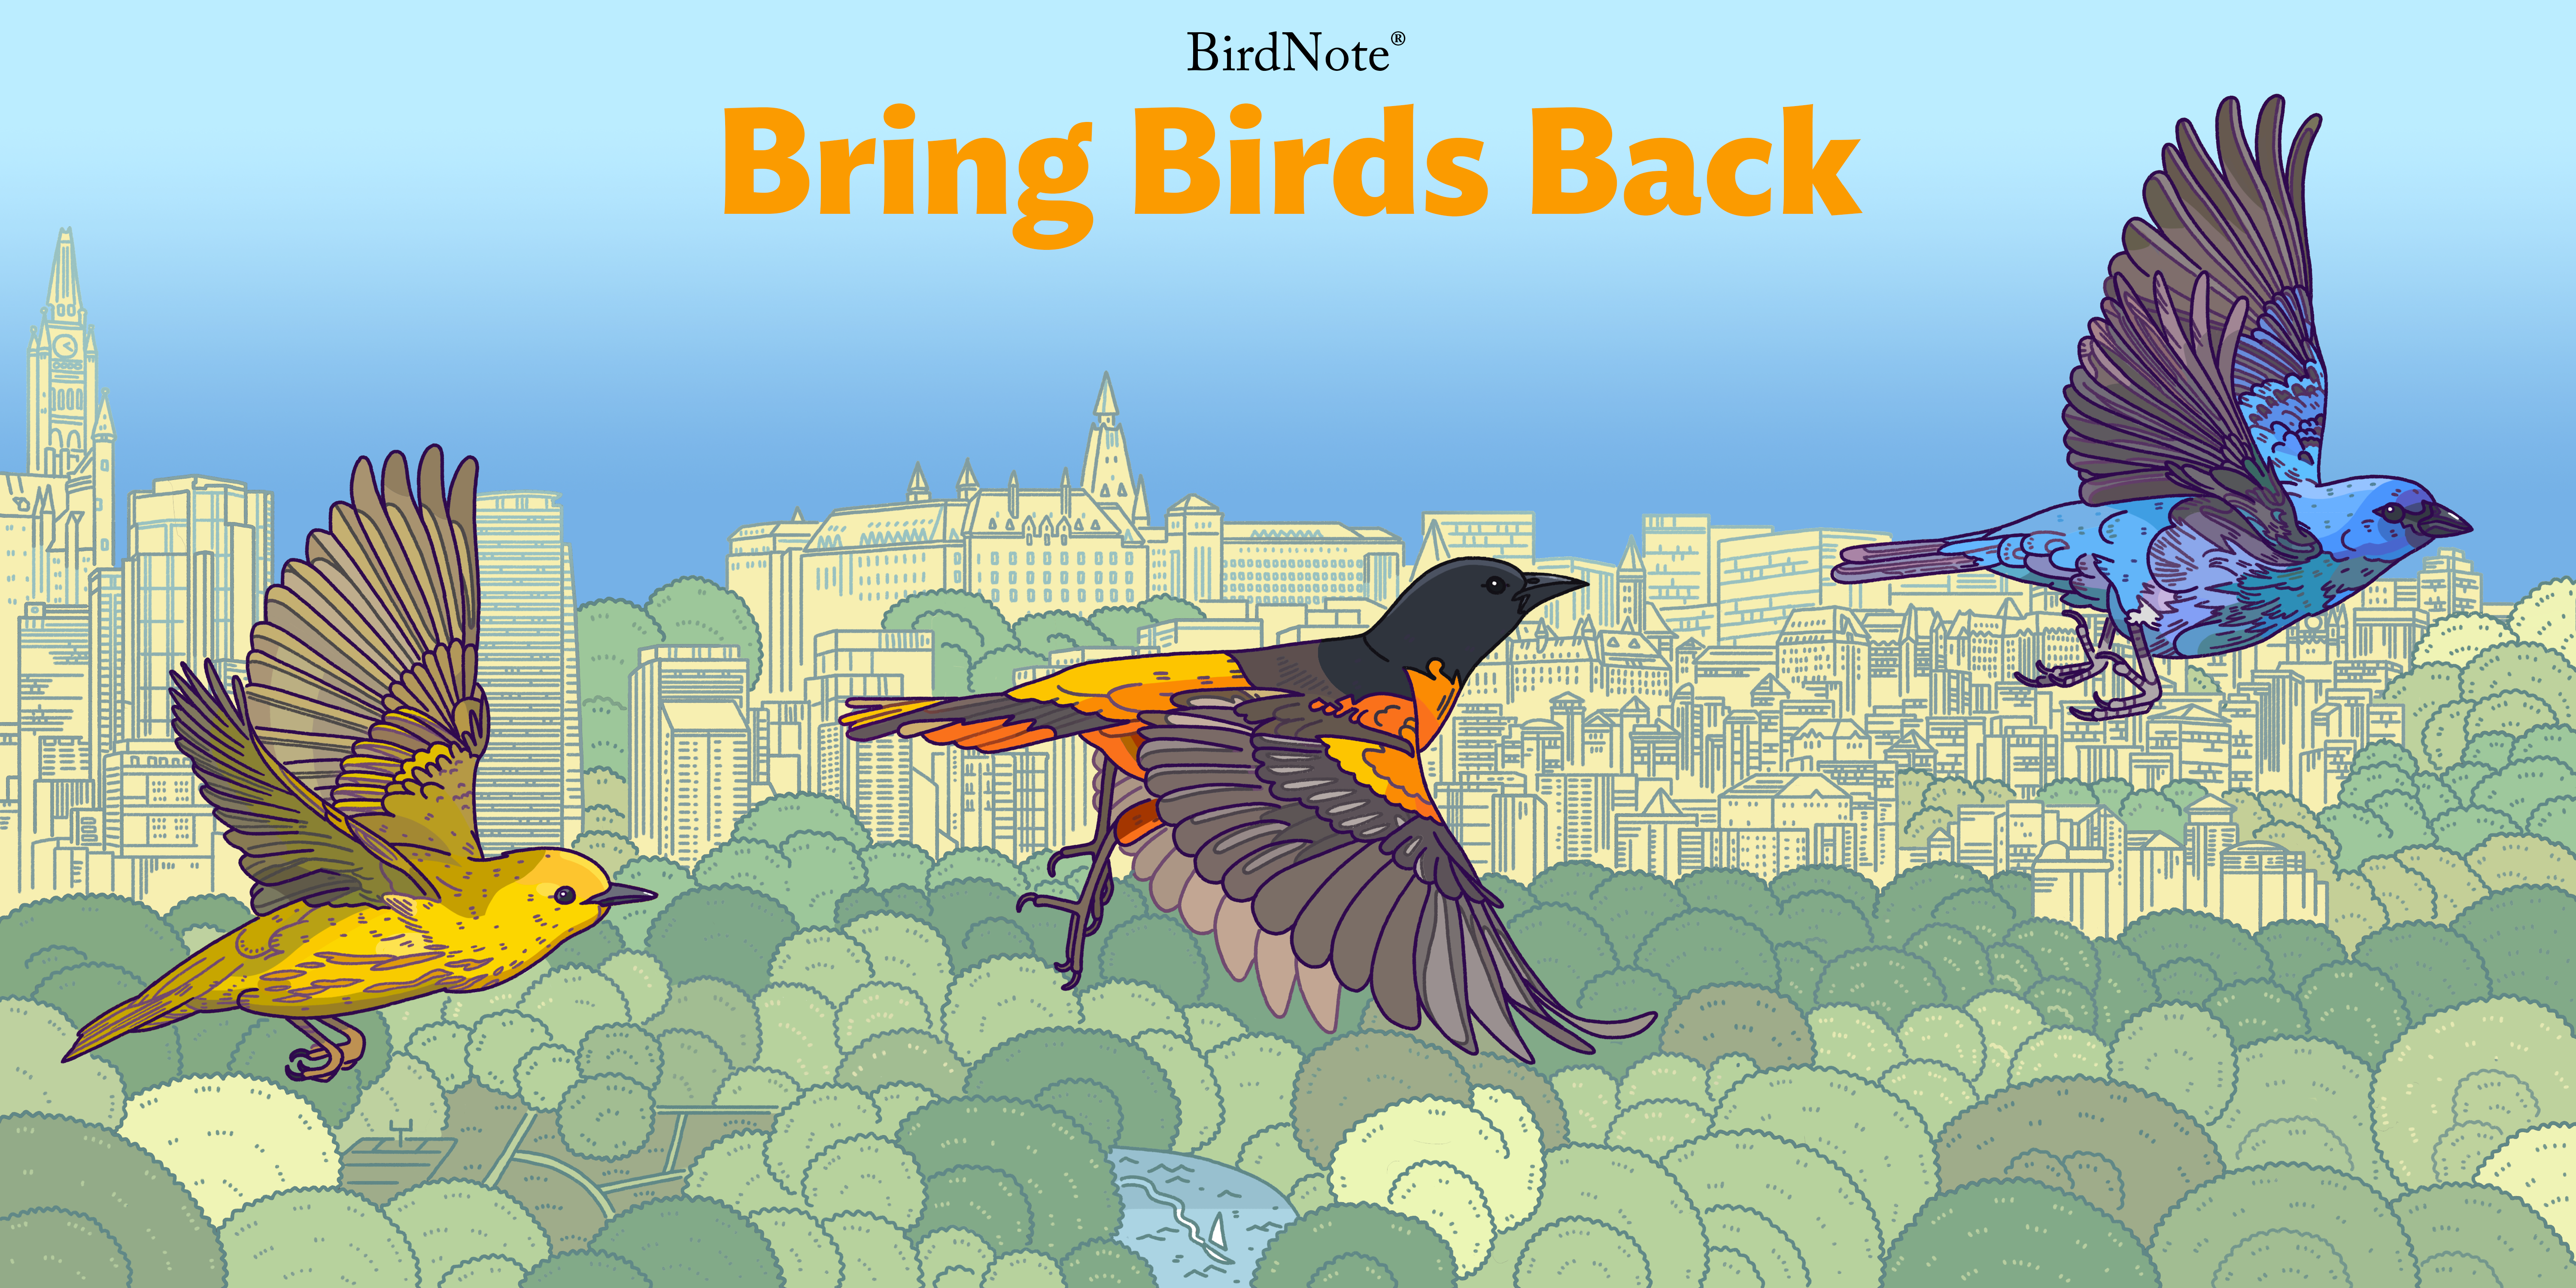 A graphic with the Bring Birds Back artwork. A Warbler, Robin, and Indigo Bunting are depicted. The text reads "Bring Birds Back"